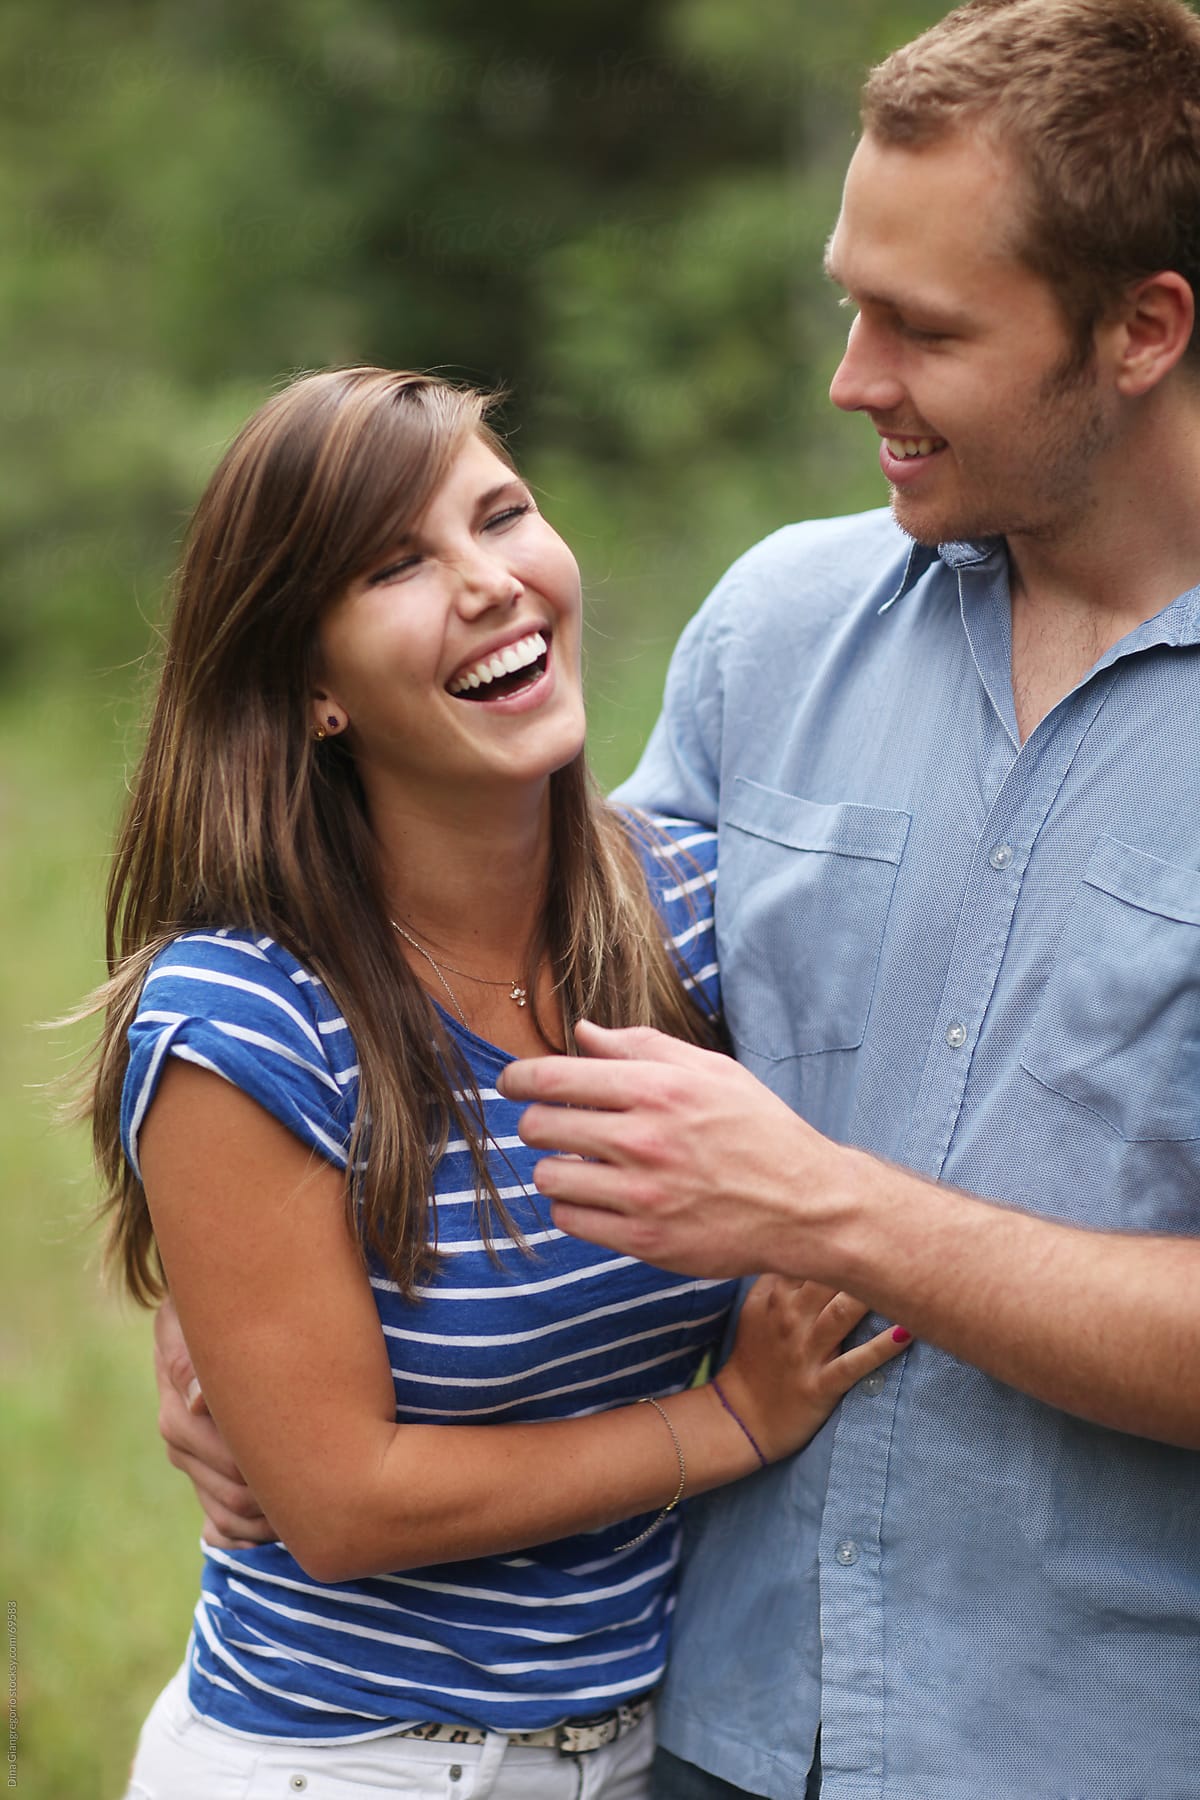 Multiethnic couple Laughing Outdoors